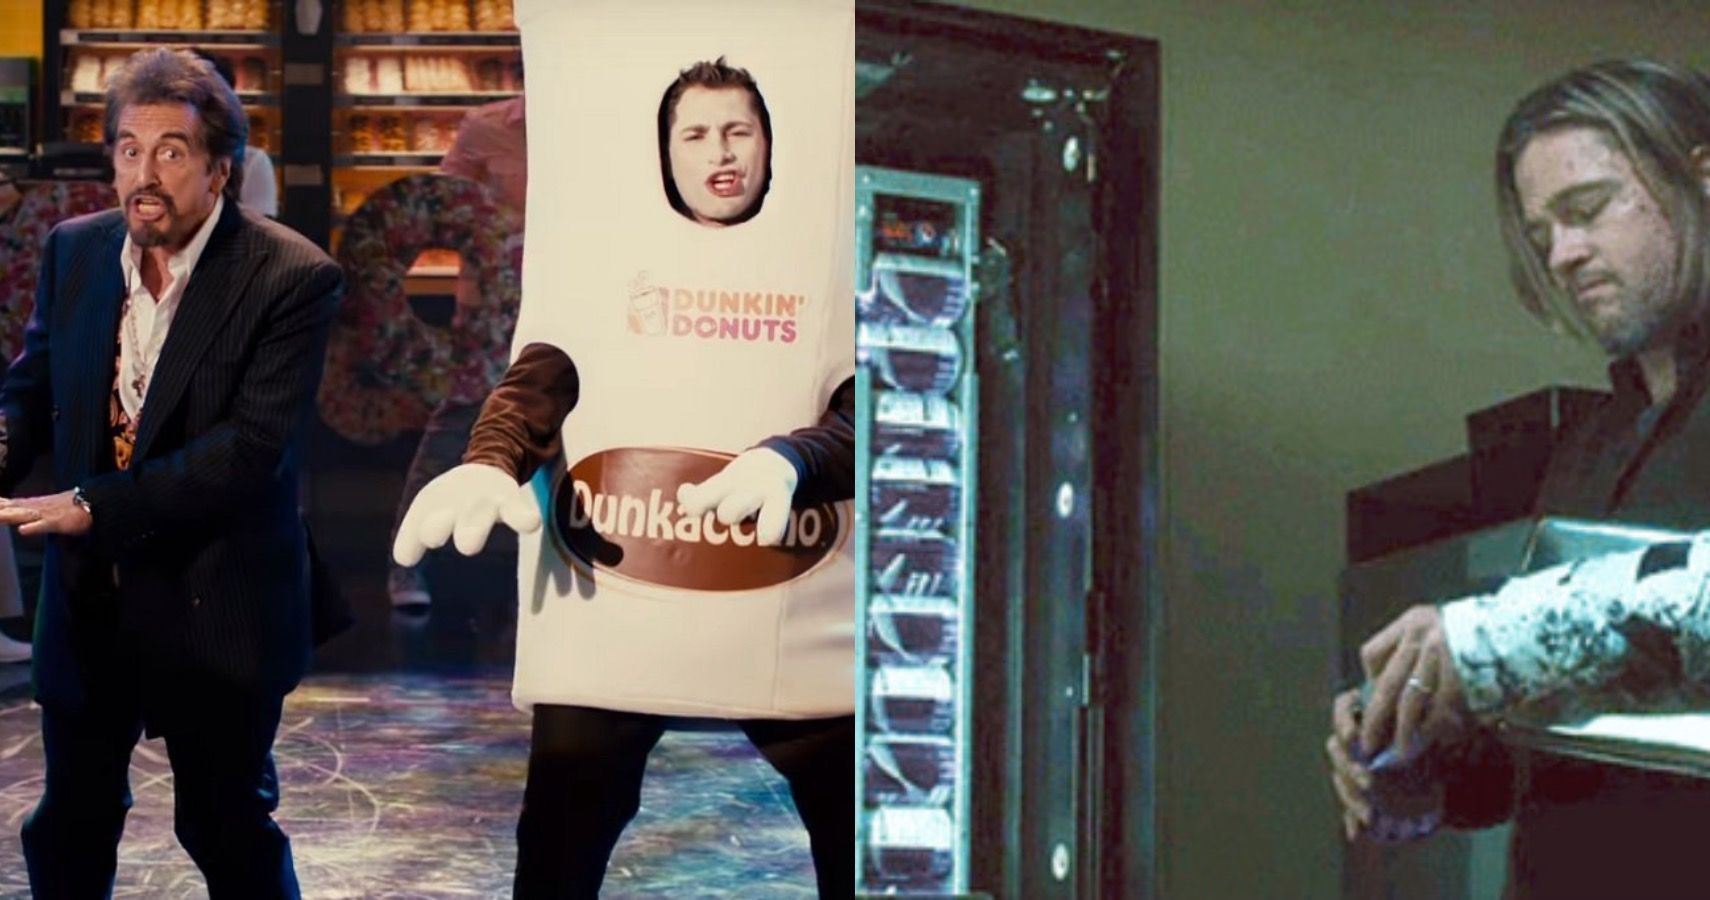 10 Most Painfully Obvious Product Placements In 2010s Movies